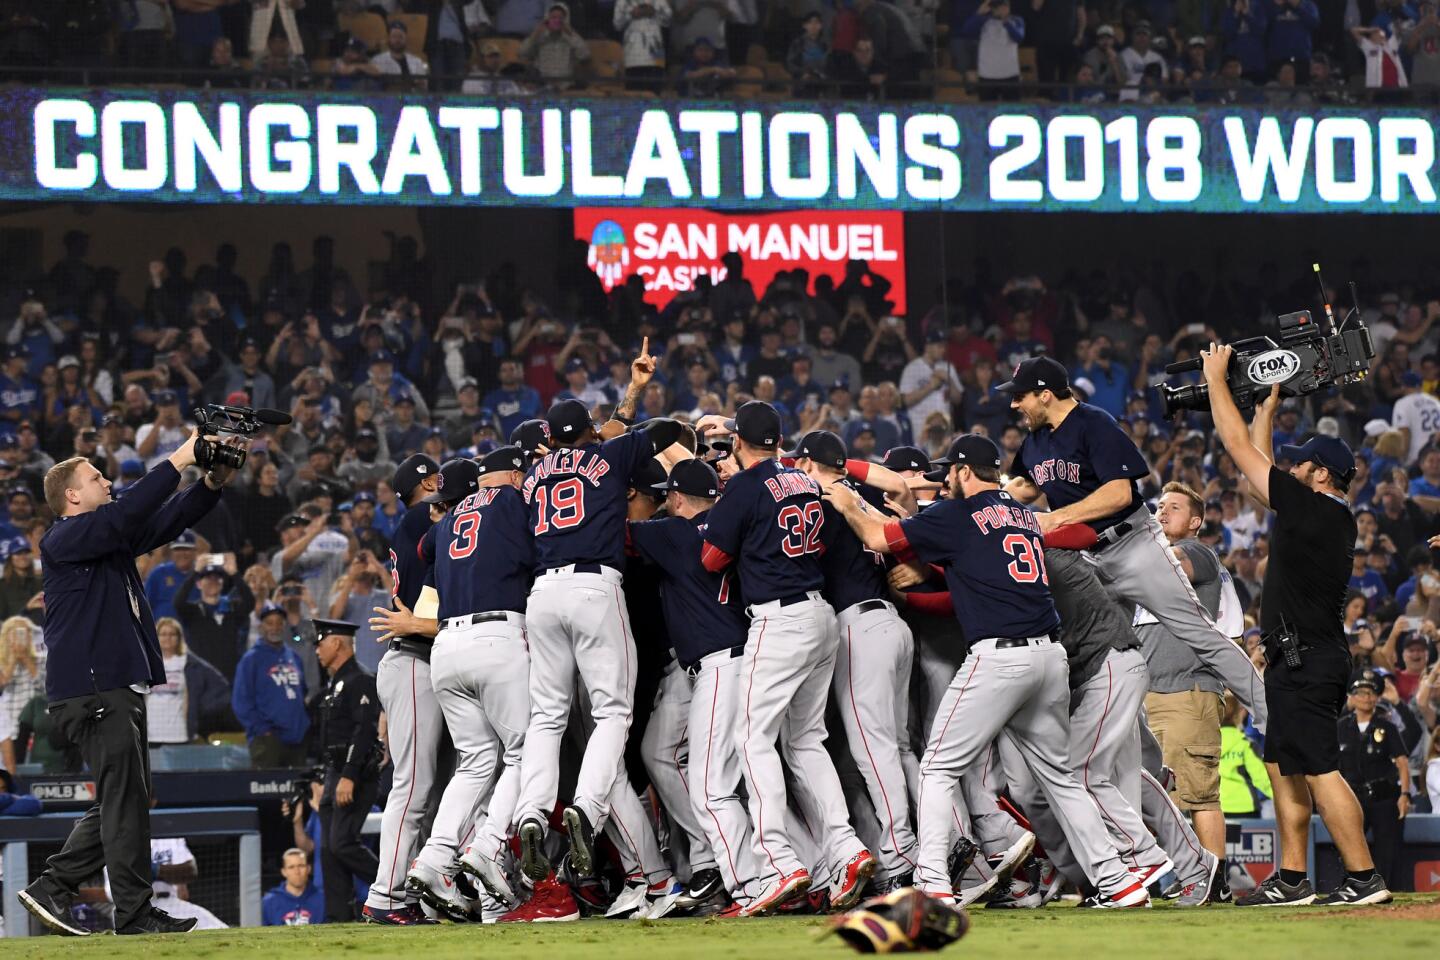 The Red Sox celebrate the championship after defeating the dodgers in Game 5 of the World Series.